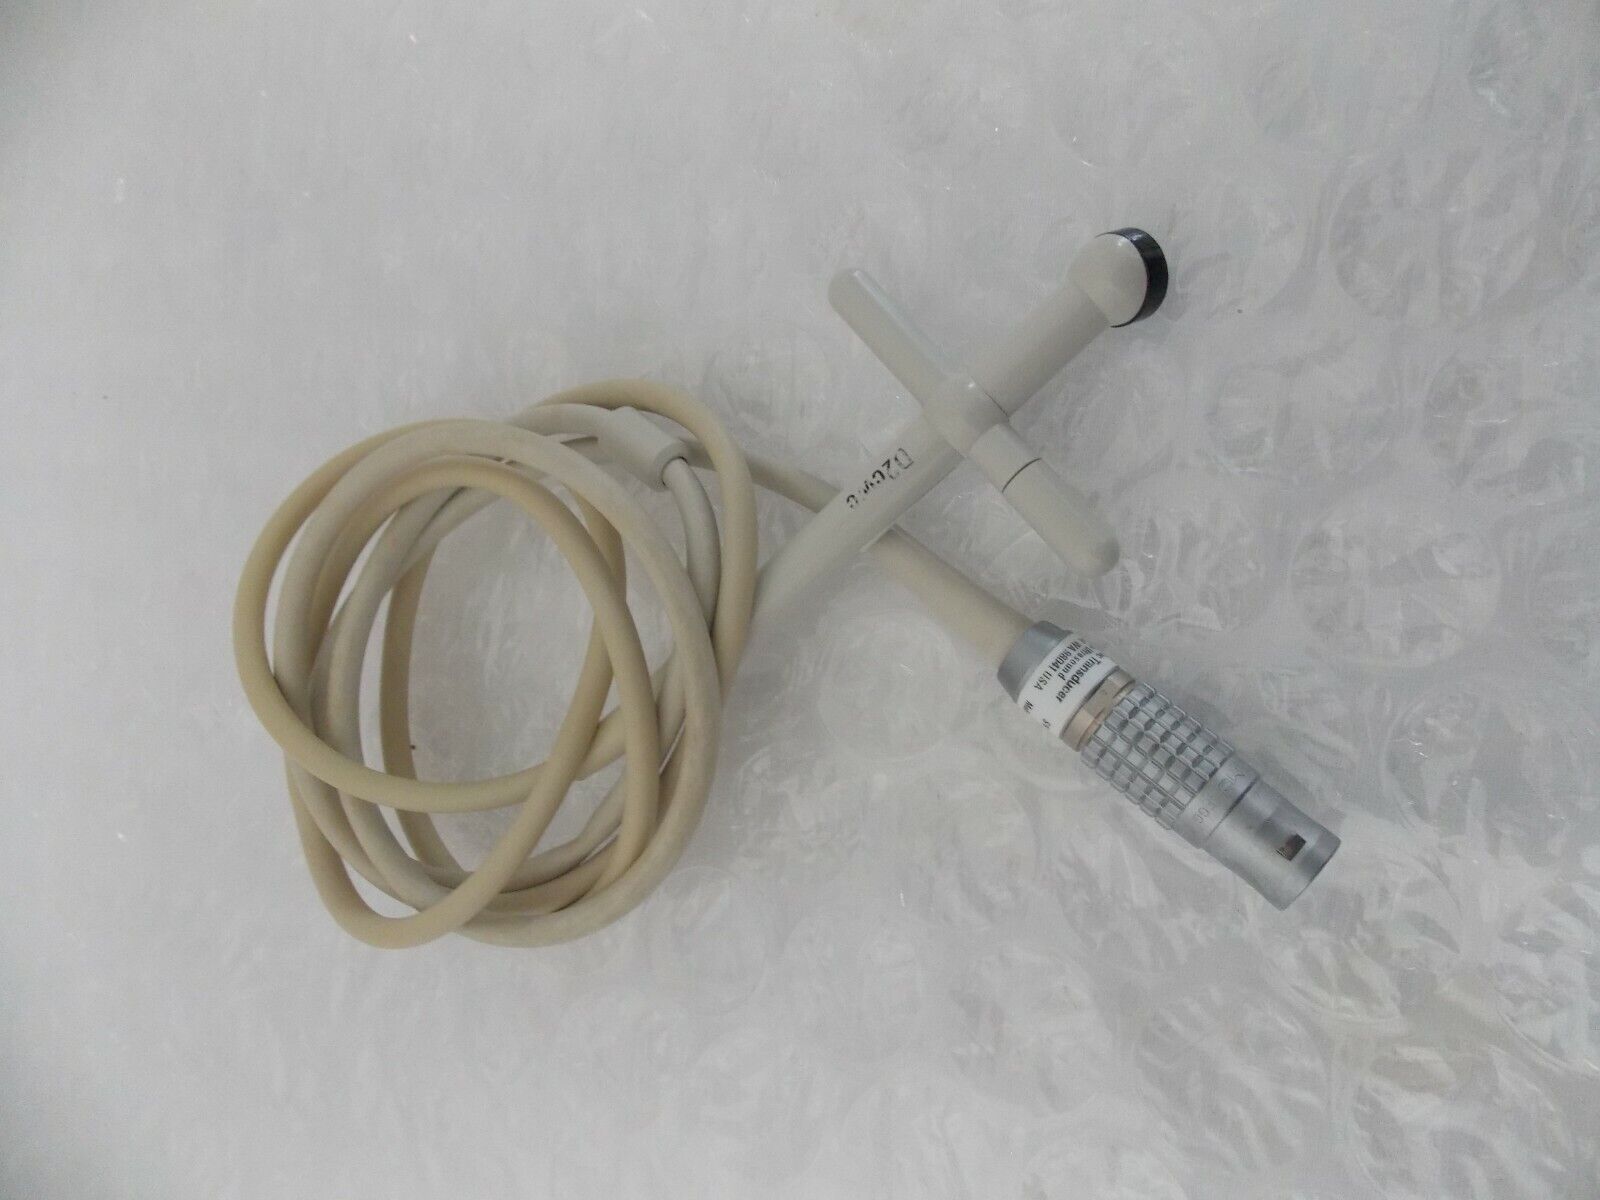 Philips D2cwc Ultrasound Transducer Probe (13)